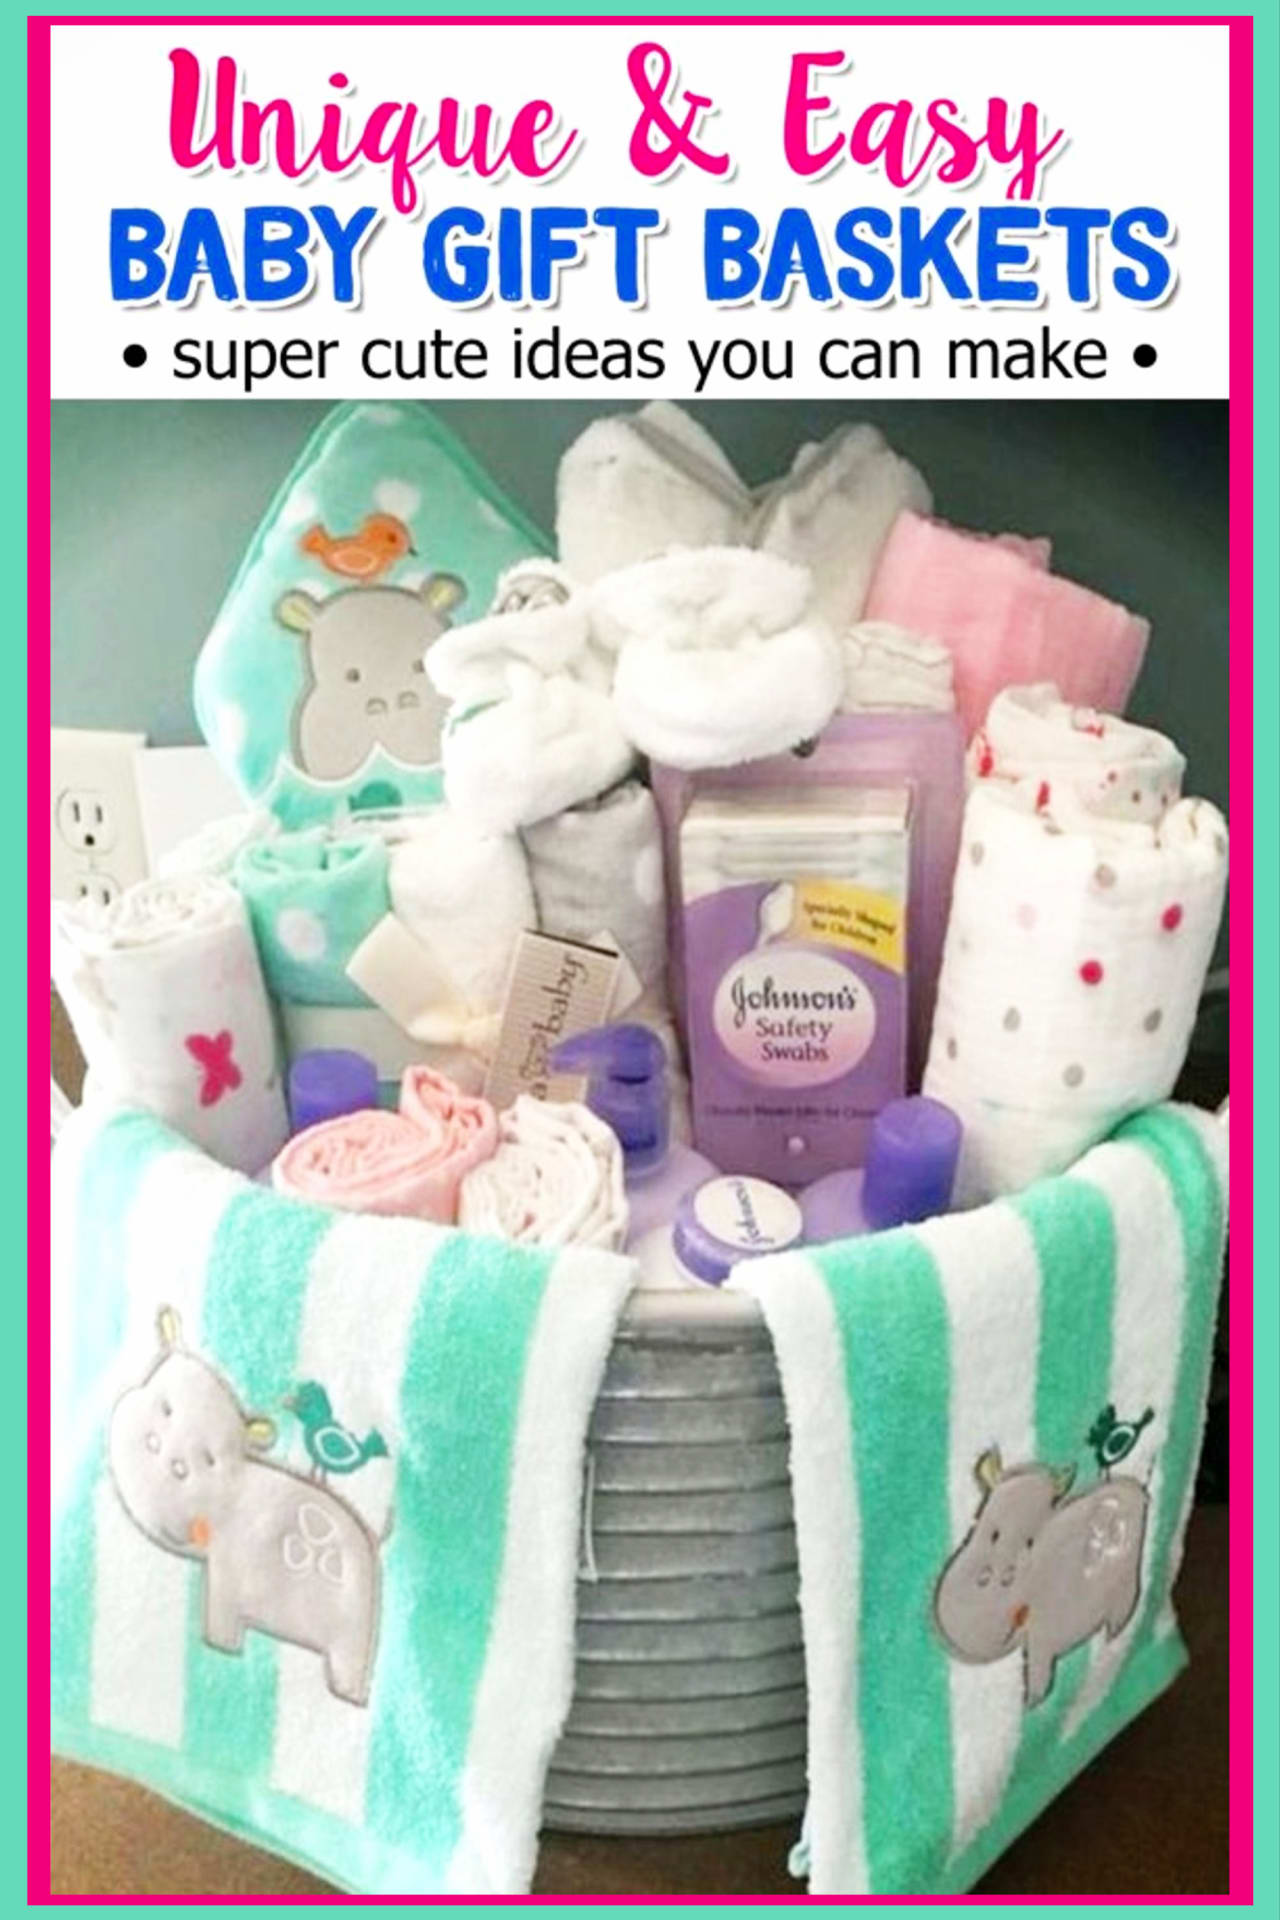 Baby shower gift ideas on a budget - cheap homemade baby shower gifts and easy DIY baby shower gift baskets to make for boys, for girls or for gender unknown (gender neutral) - cute, unique and creative baby shower gifts on a budget - baby shower gift baskets, baby shower bathtub gift baskets and more creative and inexpensive baby shower gifts to make